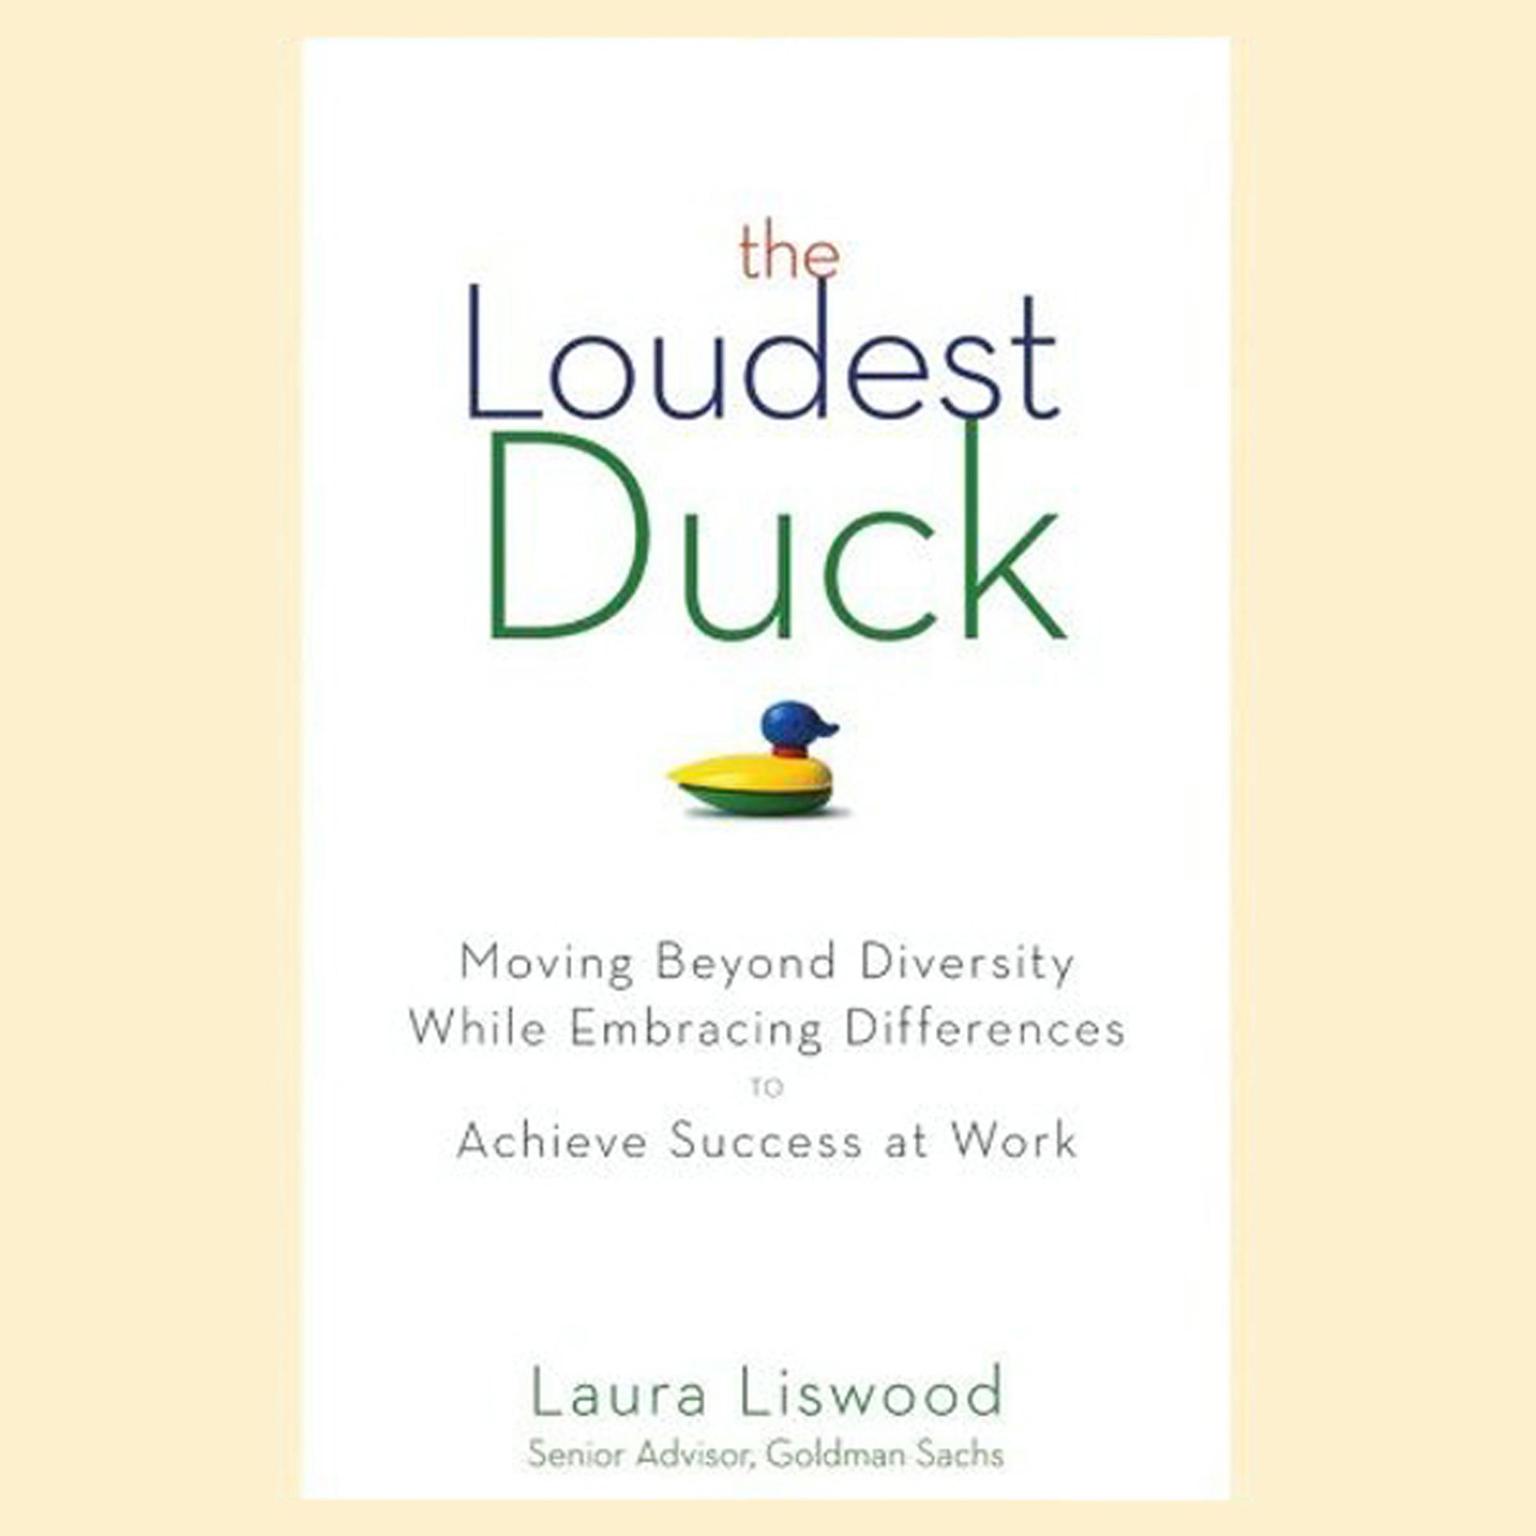 The Loudest Duck: Moving Beyond Diversity while Embracing Differences to Achieve Success at Work  Audiobook, by Laura A. Liswood